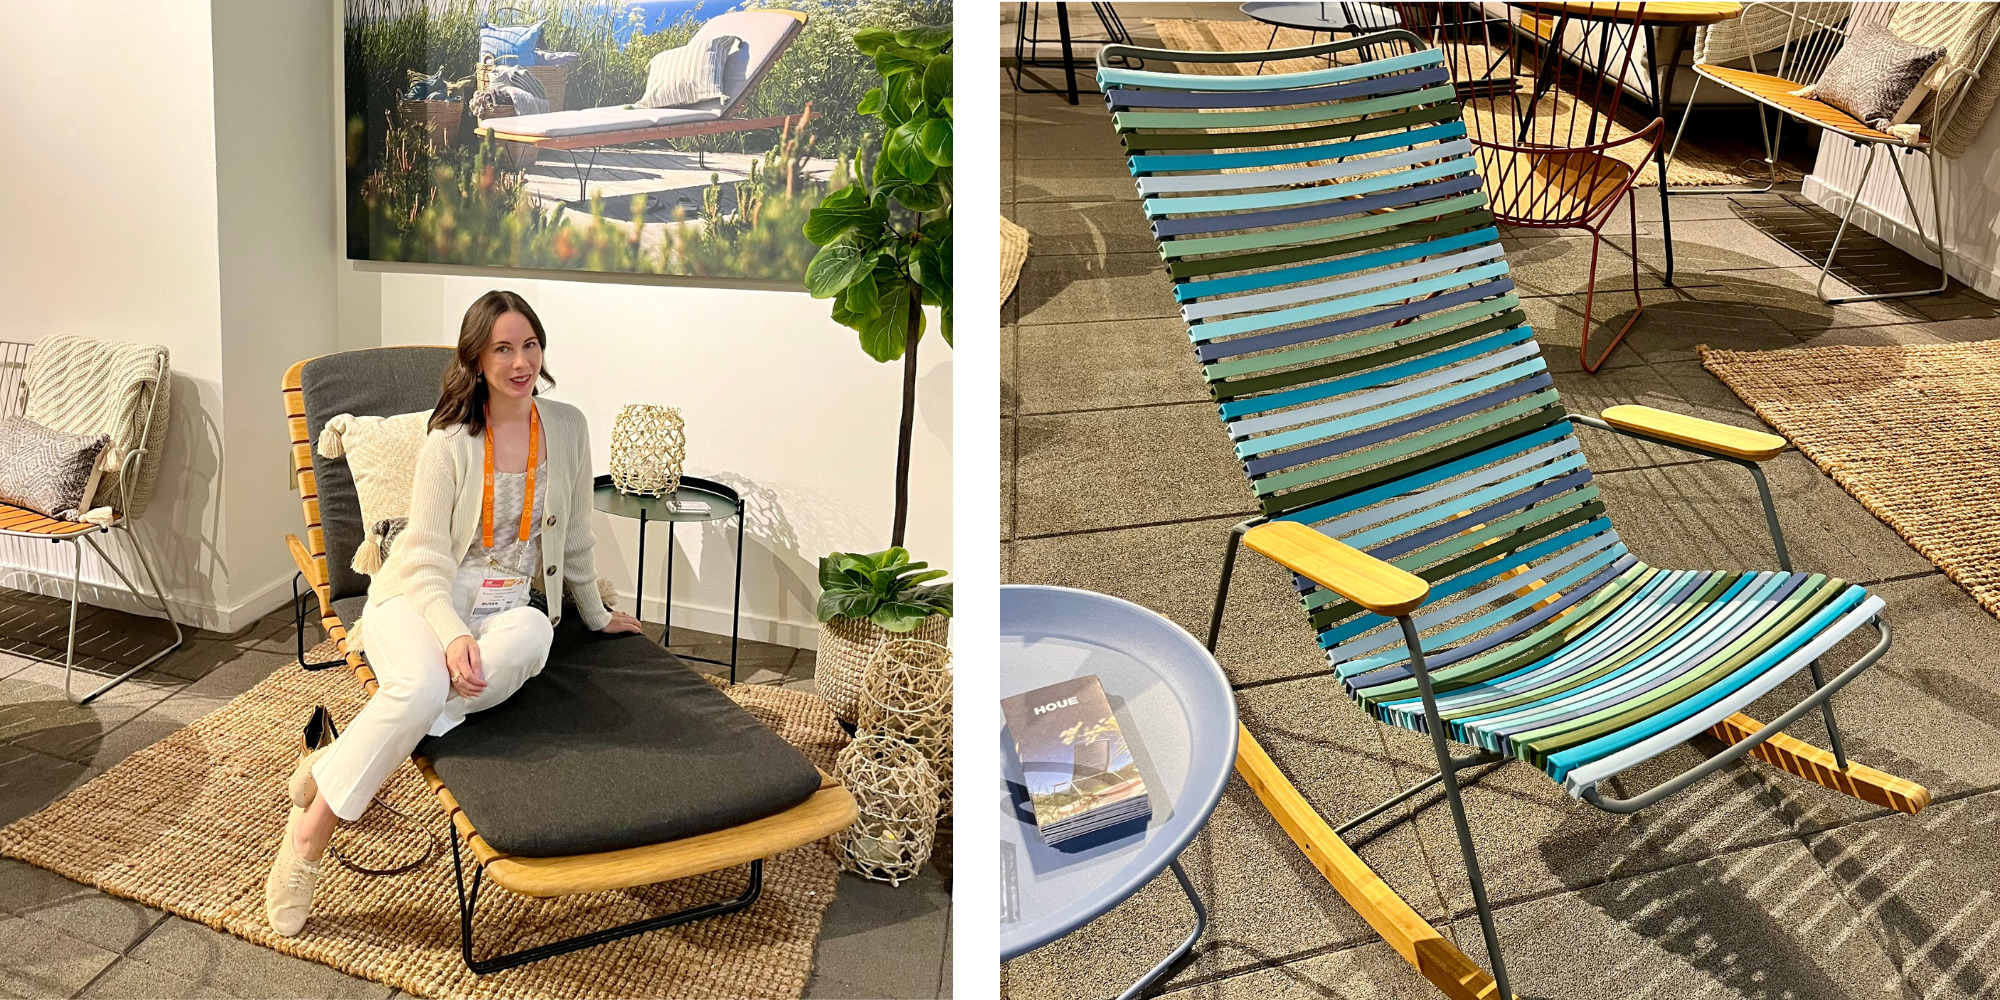 Images of the Houe outdoor furniture showroom from High Point Market